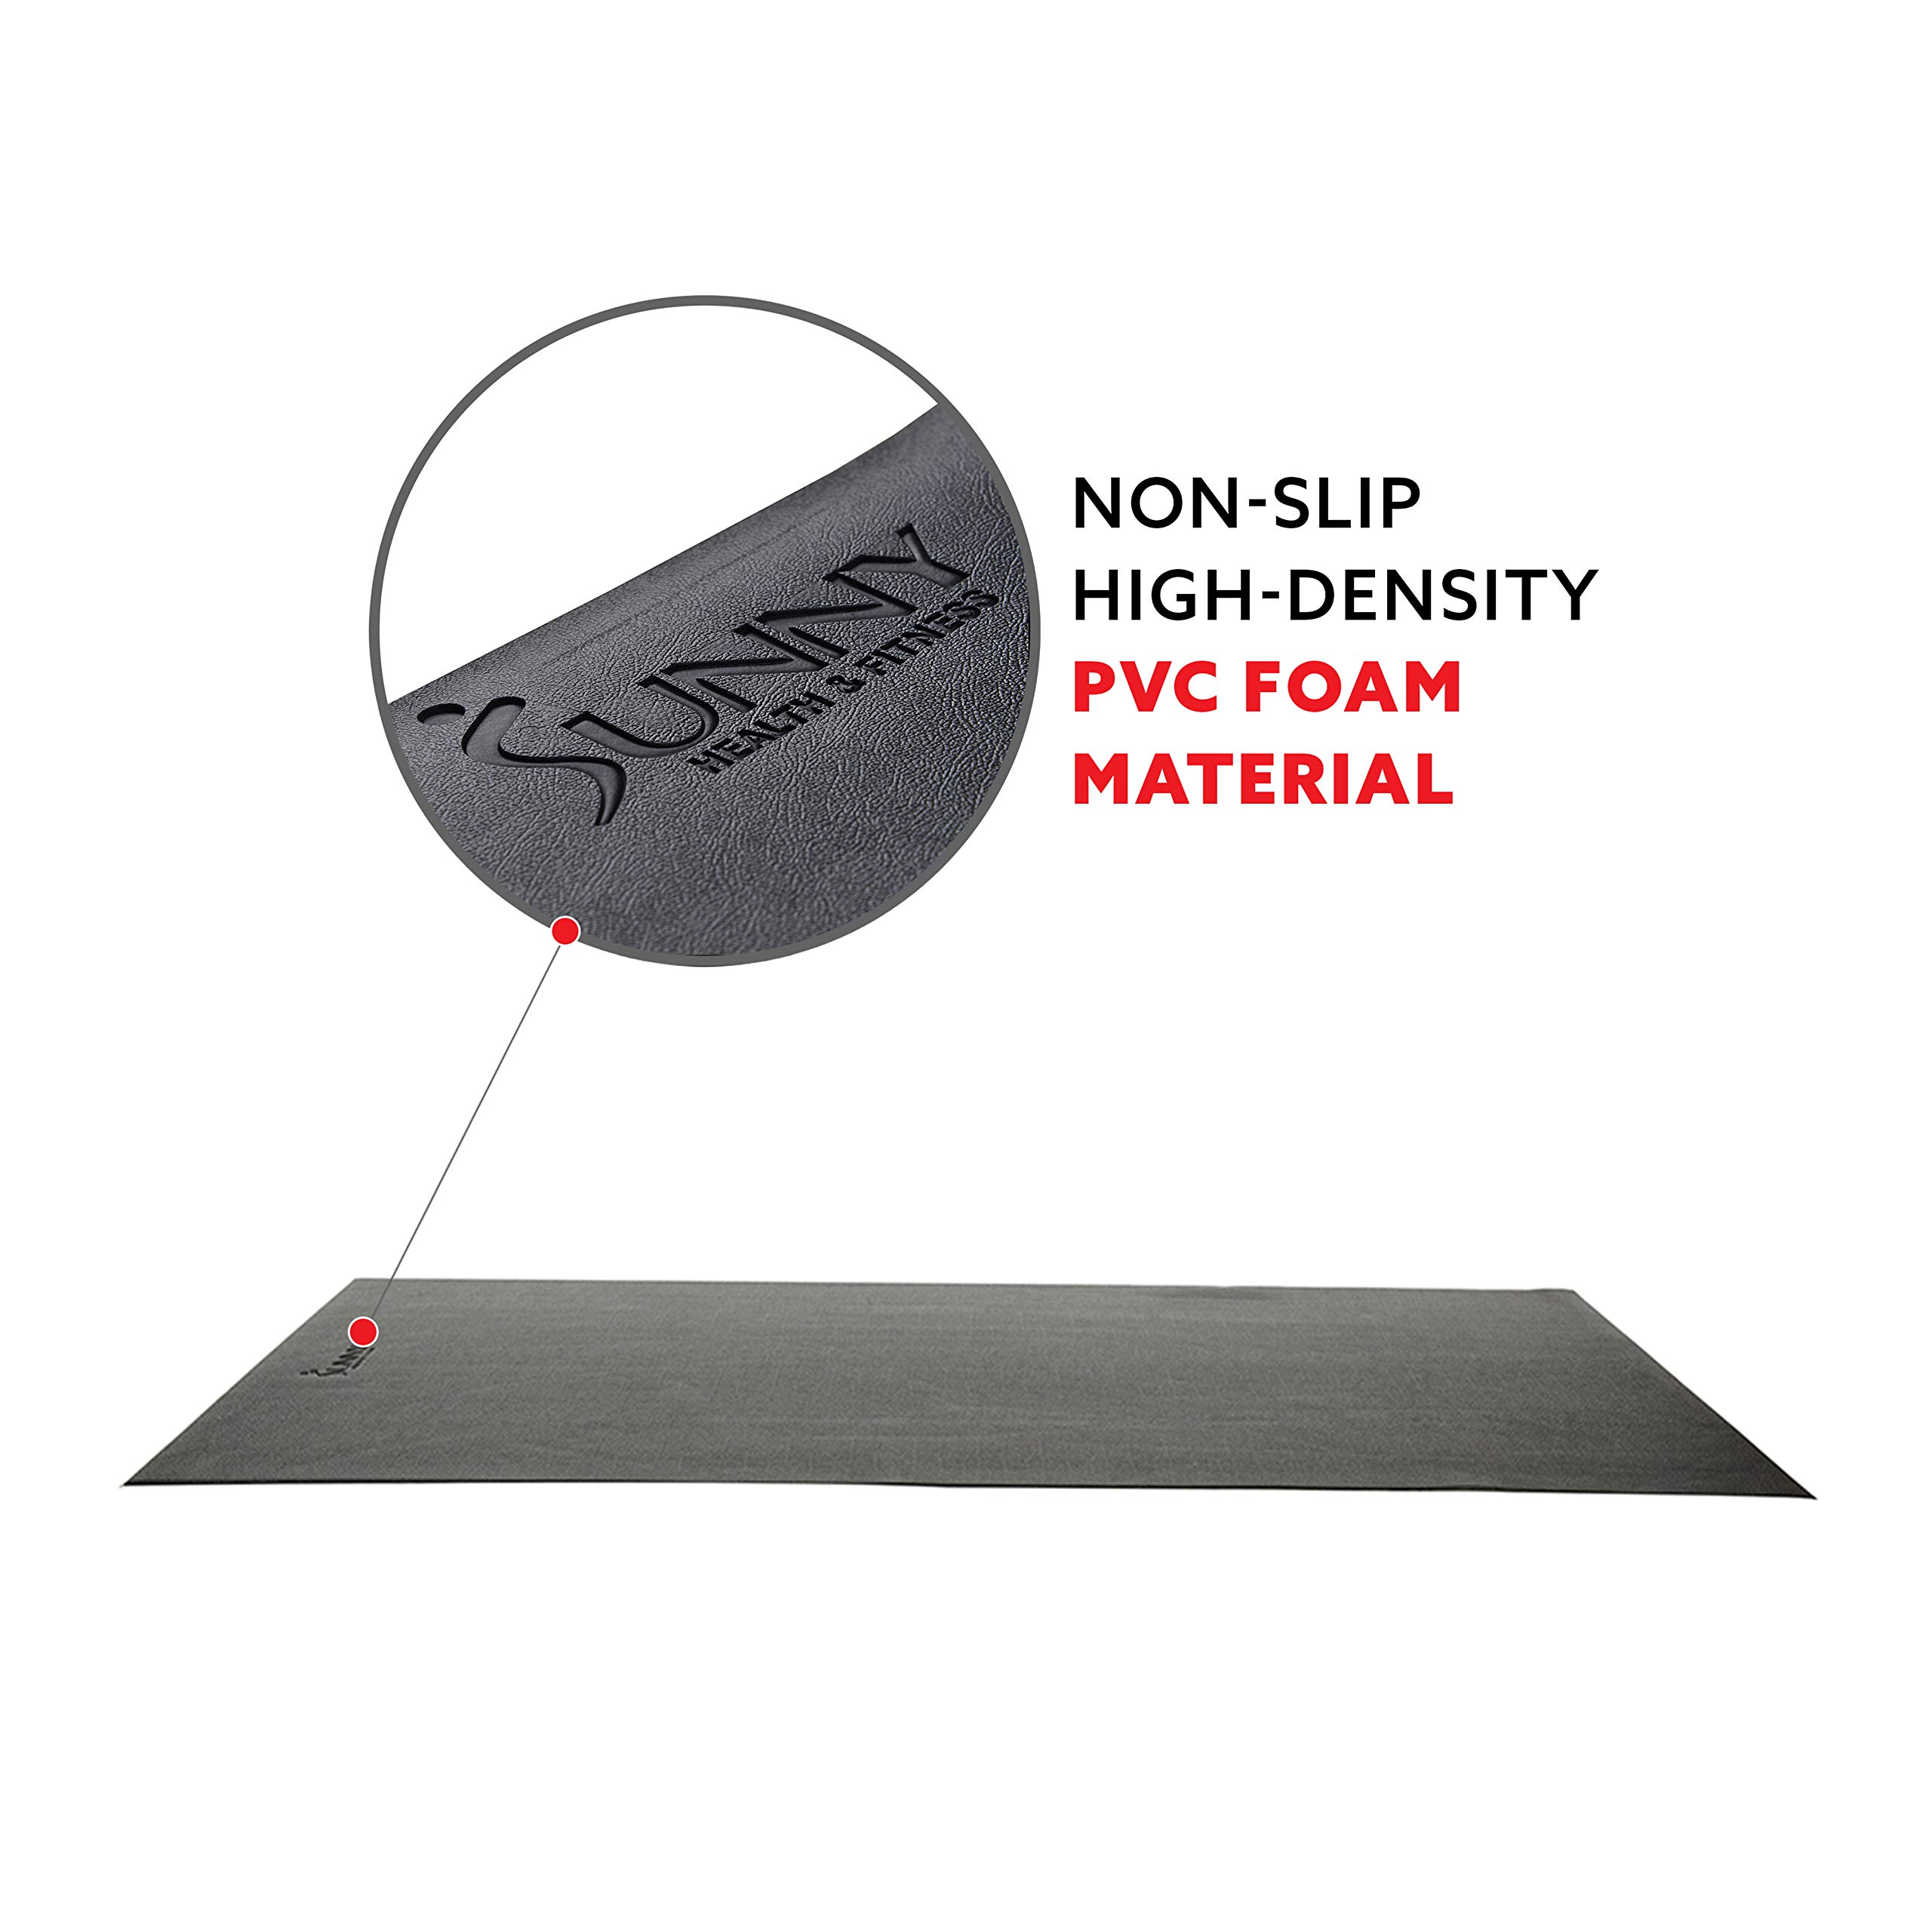 Sunny Health & Fitness Home Gym Foam Floor Protector Mat for Fitness & Exercise Equipment - Available in 4 Size Options